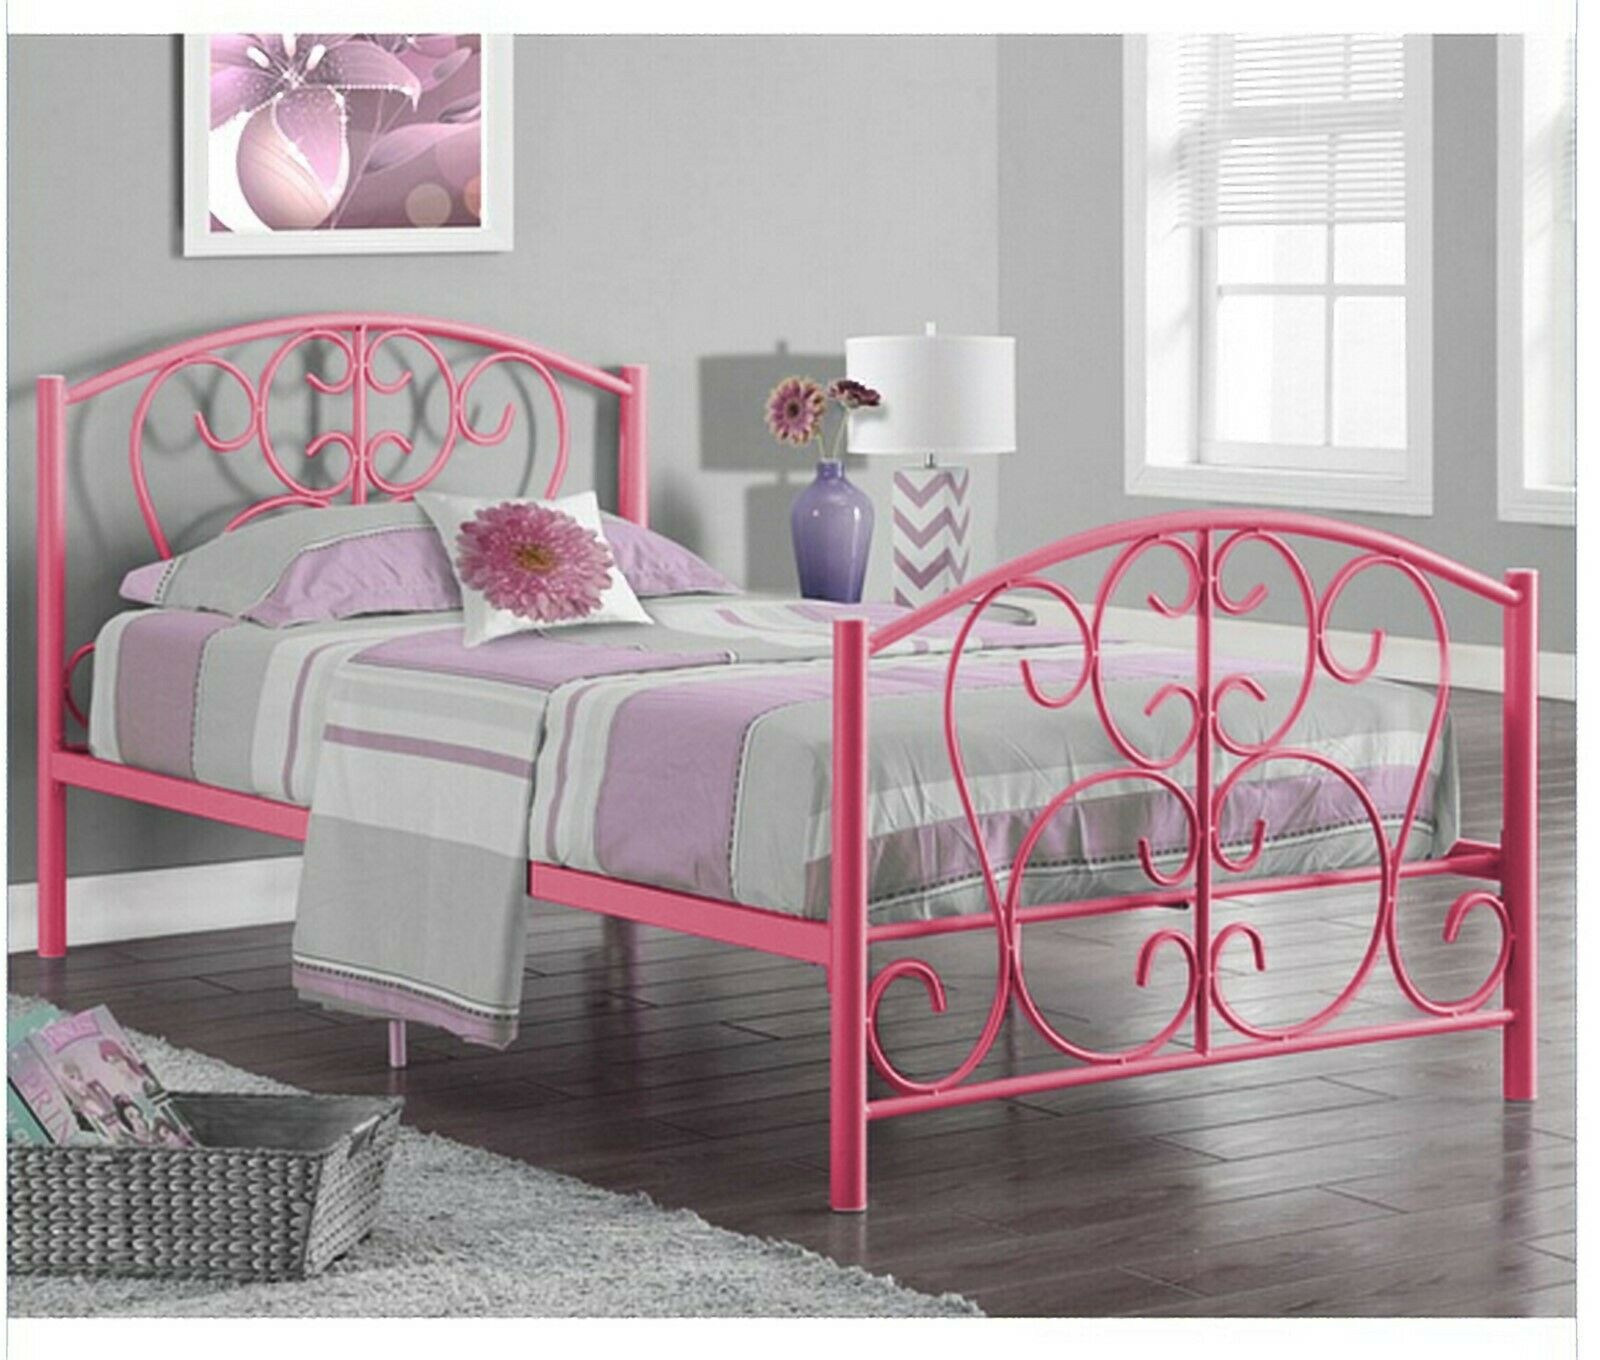 3ft Single Classic Metal Bed Frame in White or Pink with Mattress Options